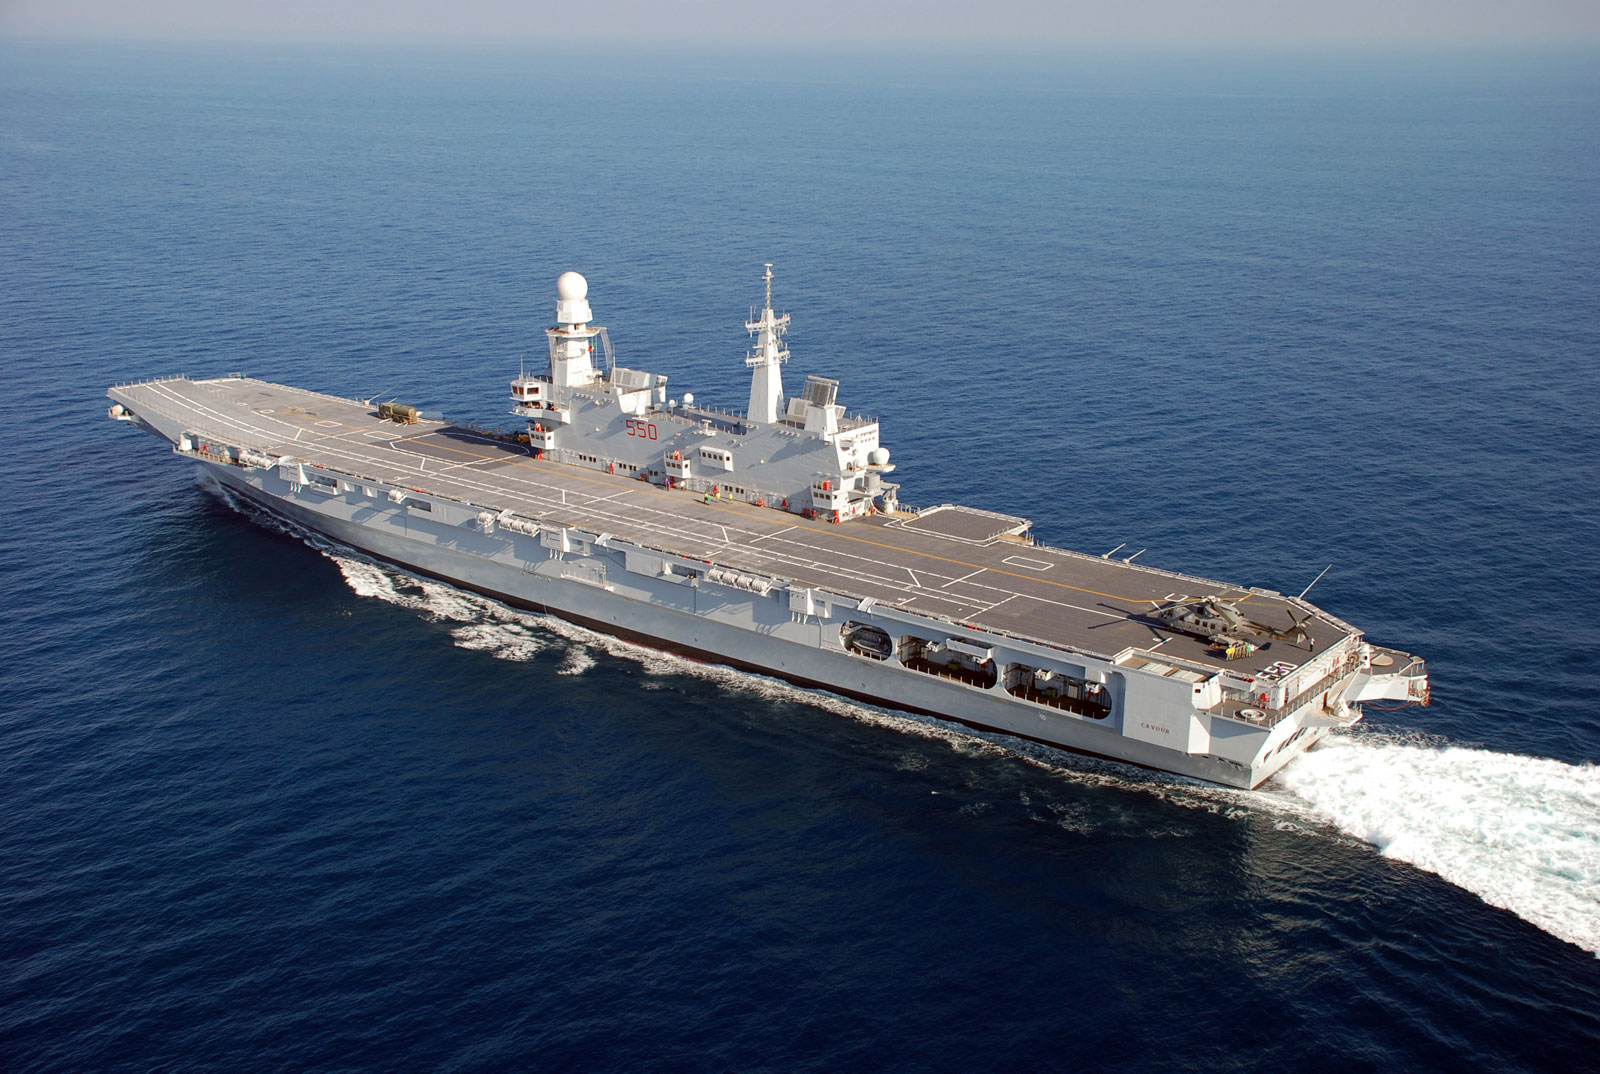 Italian Navy's aircraft carrier ITS Cavour